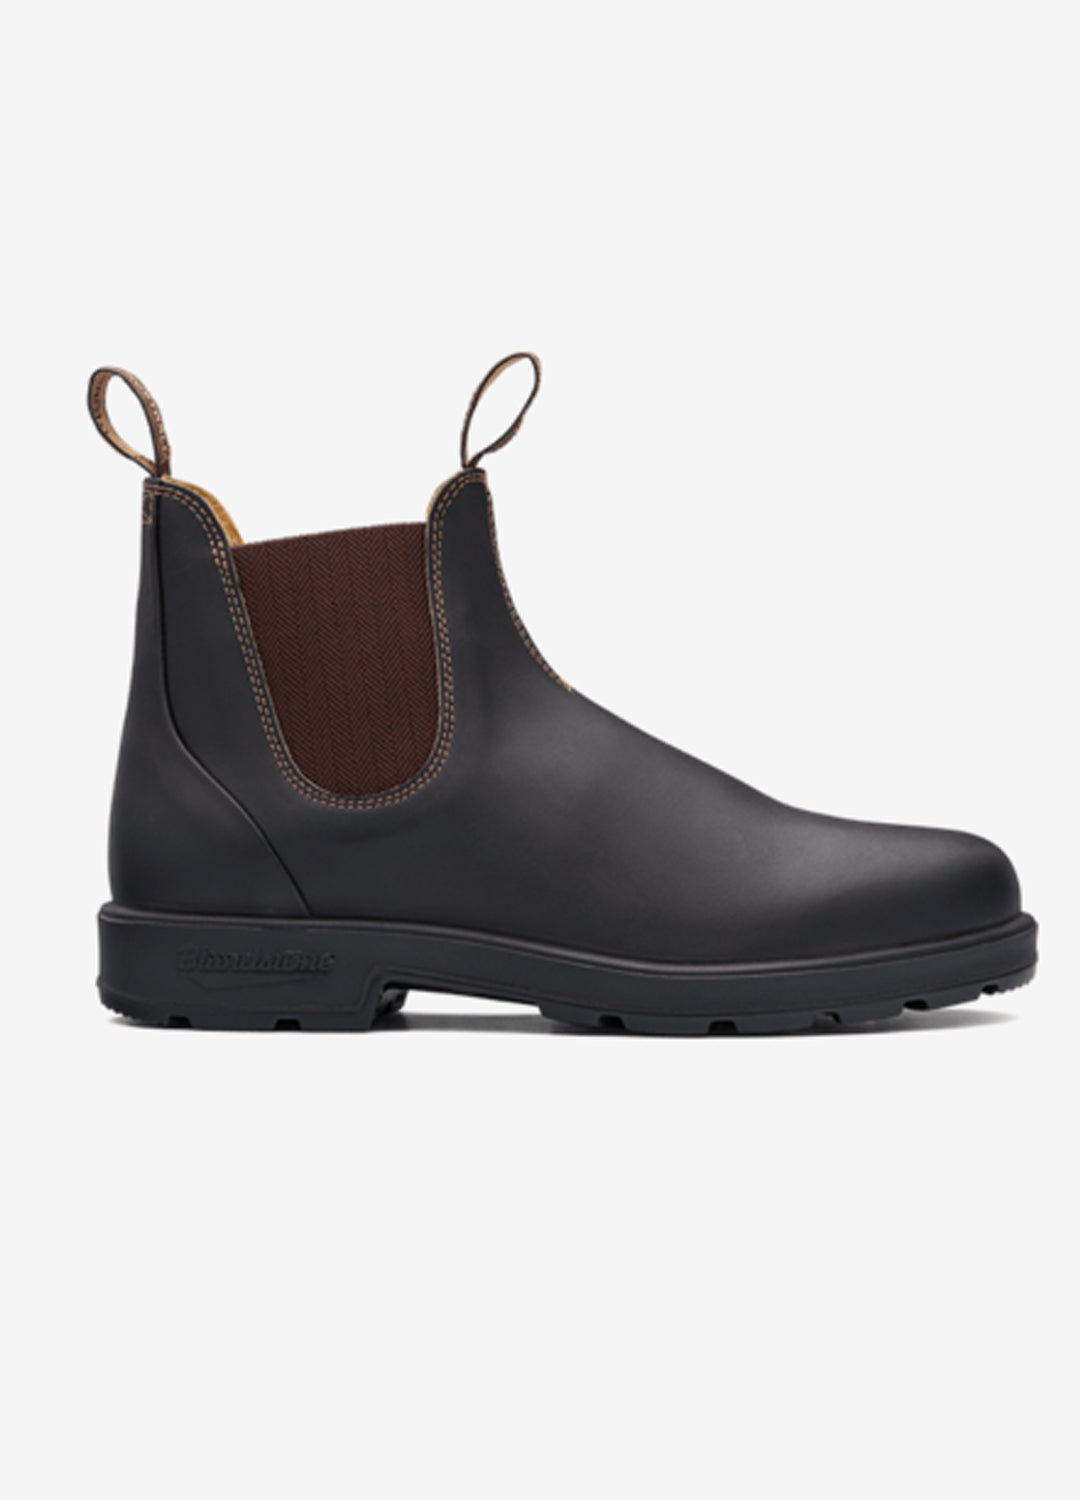 Blundstone Boots 600 Adelaide